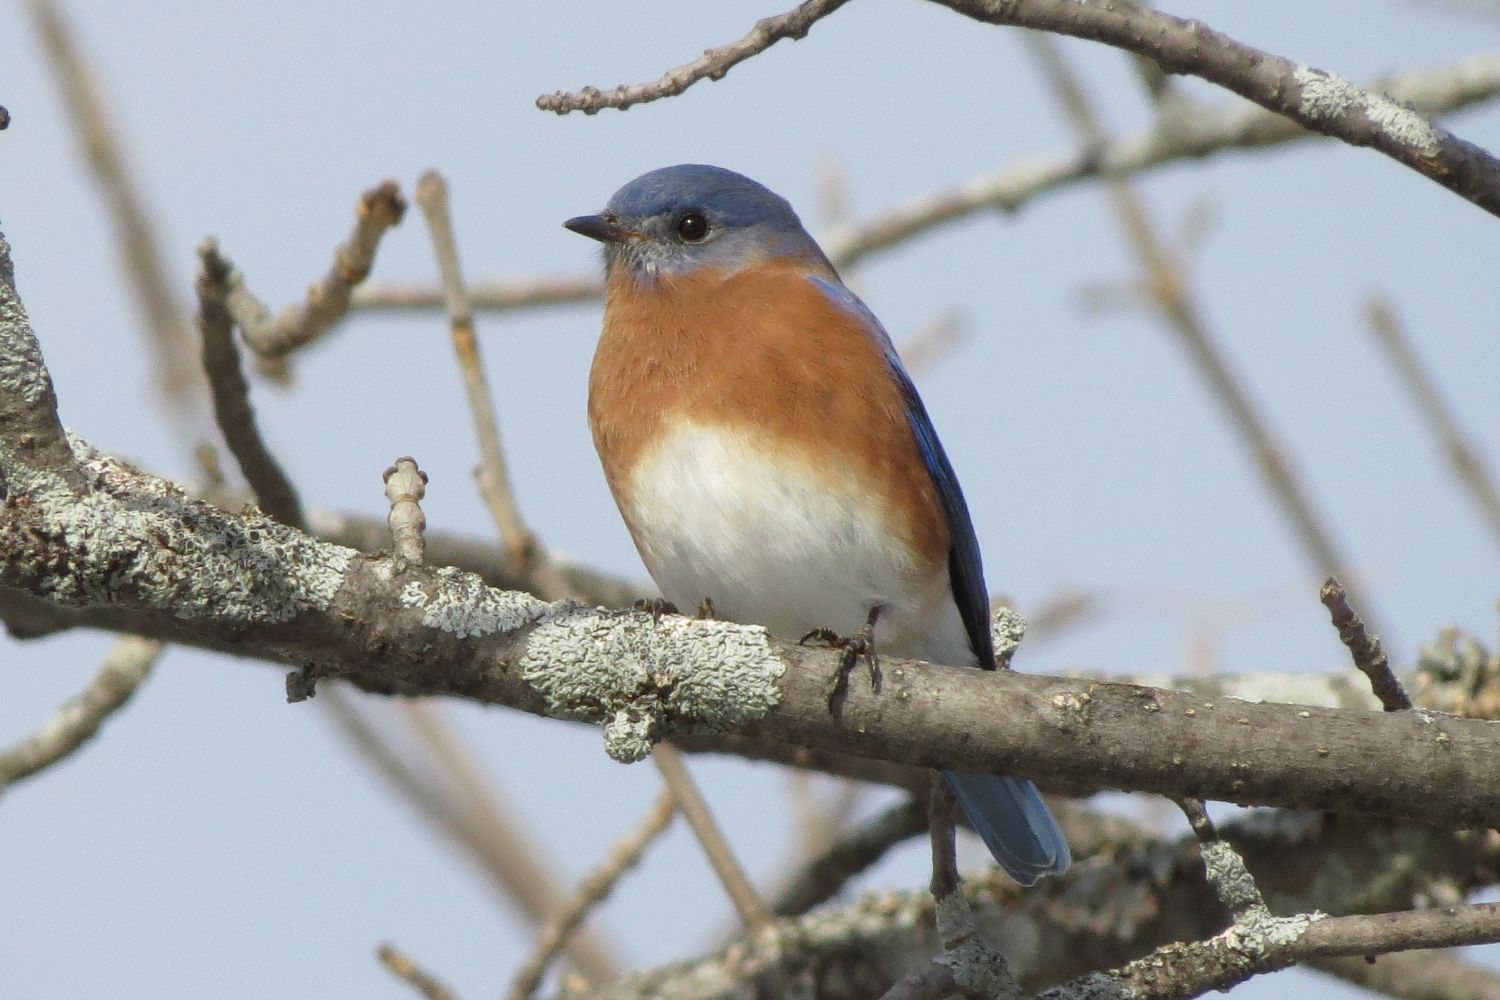 Bluebird sitting on a branch, photo taken by Pat Demko during a past Christmas Bird Count